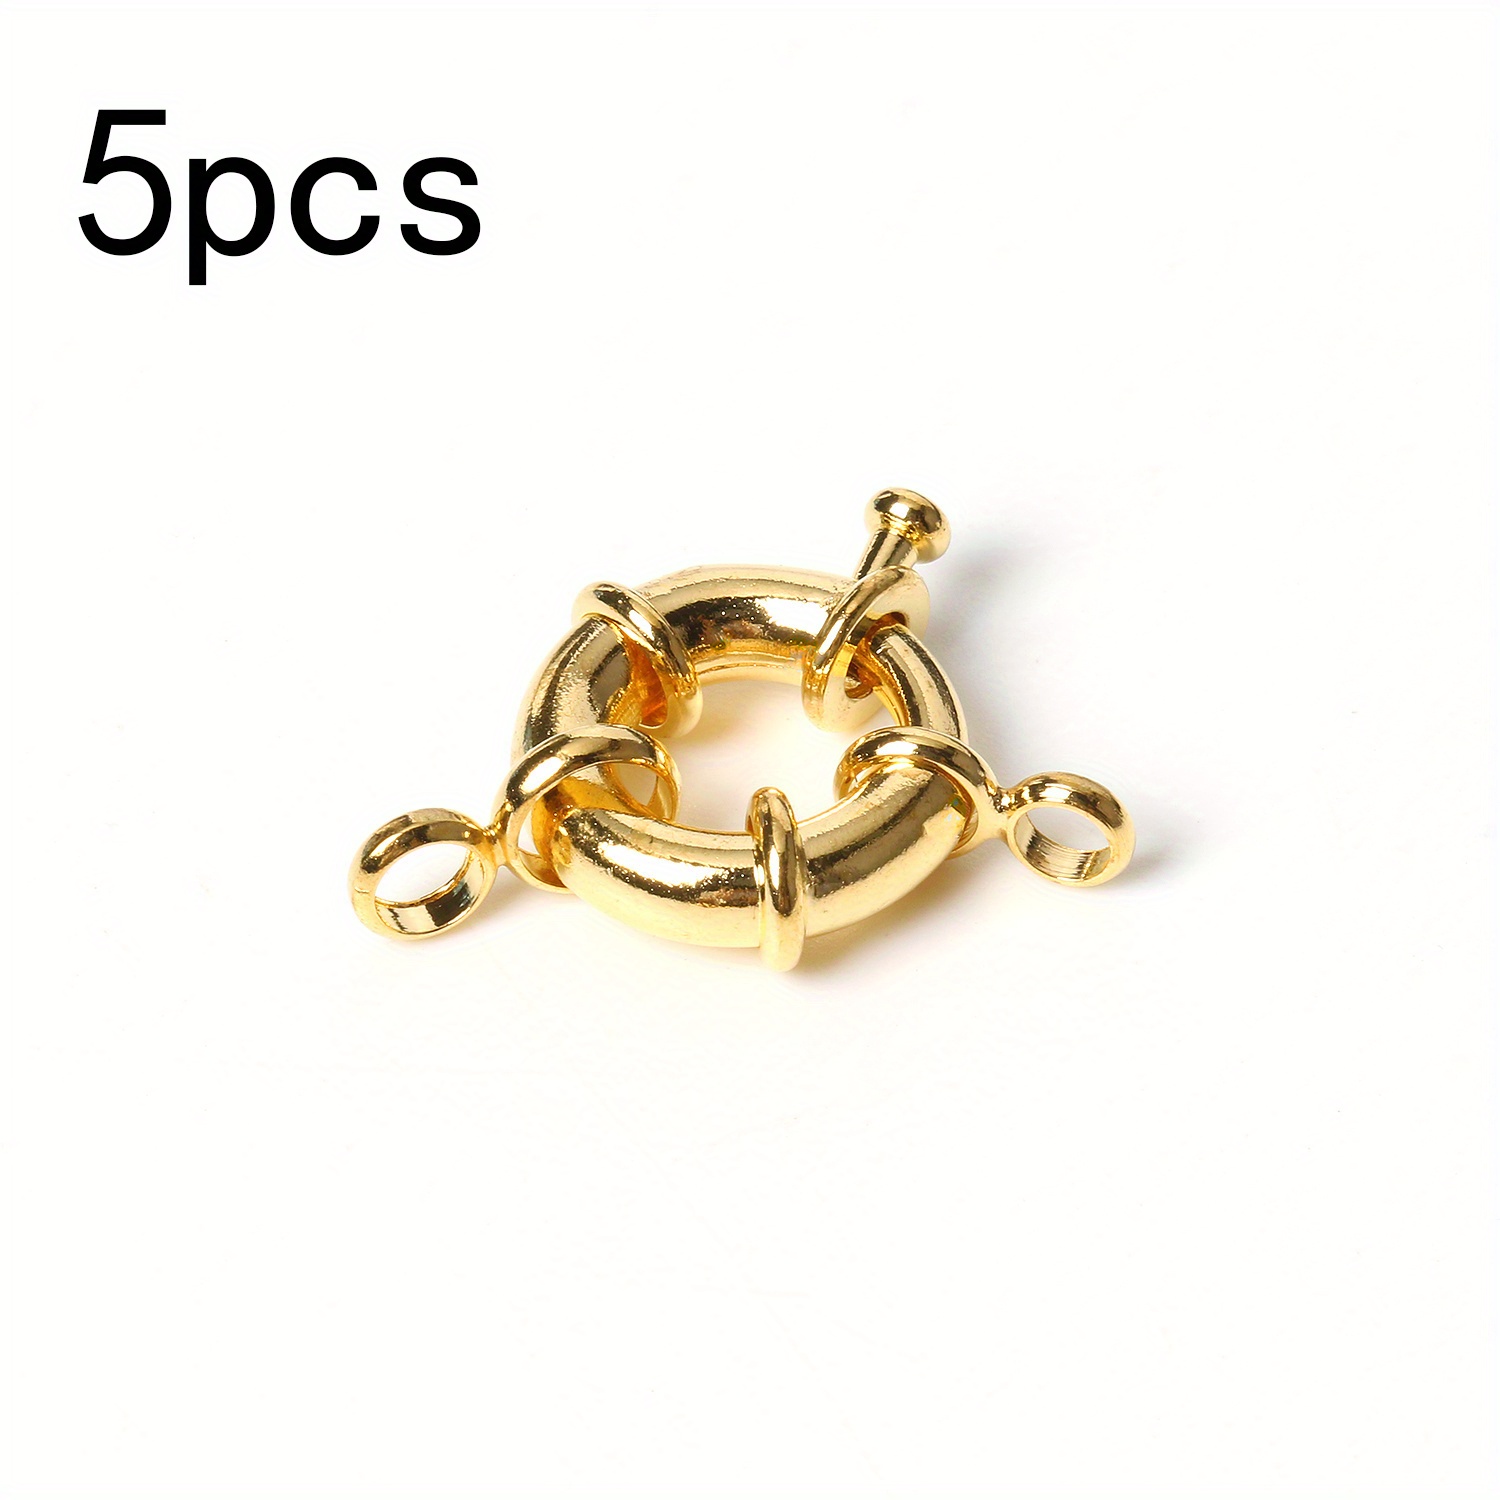 5pcs/lot Copper Sailor Clasps Connector End Clasps Round DIY Jewelry Making  Findings Fit Charm Bracelets Clavicle Necklace Clasp - (Color